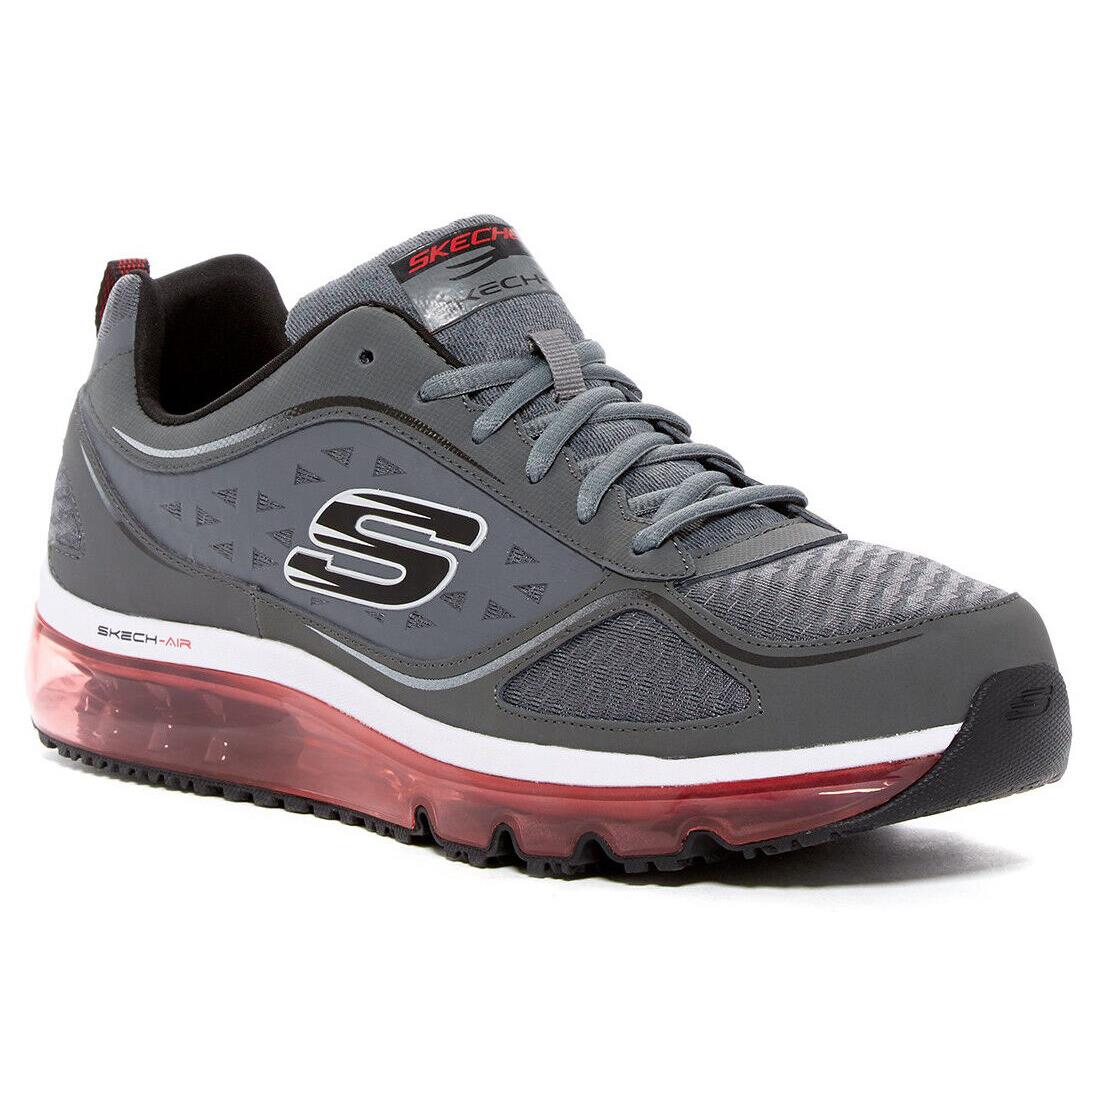 Skechers Skech-air Supreme Sneaker Men`s Training Shoes 52111 Gray Red Size 13